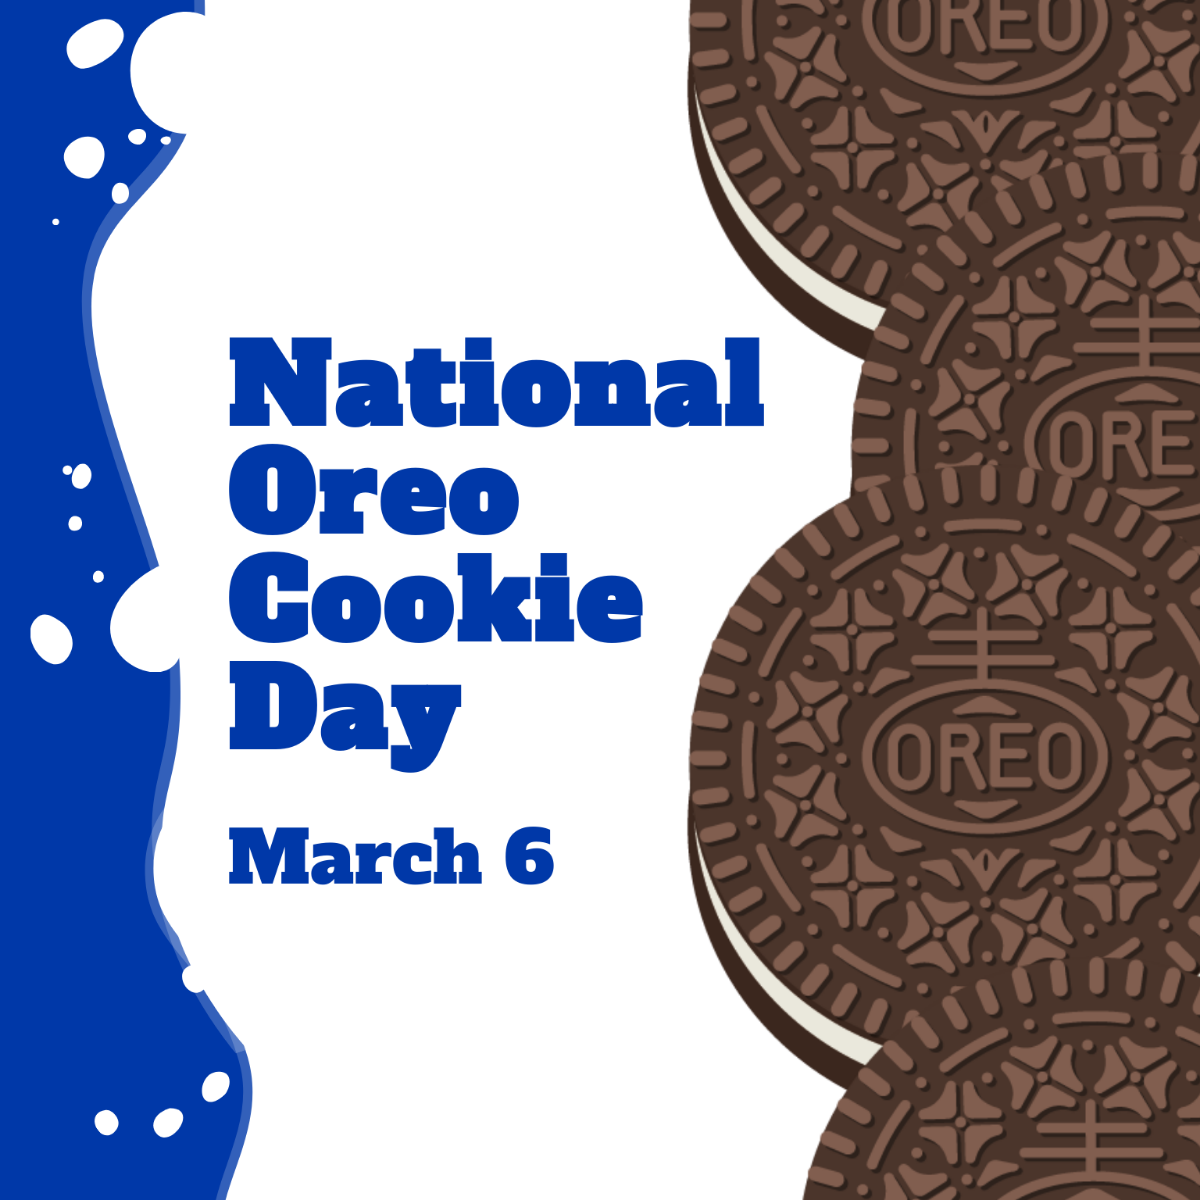 National Oreo Cookie Day Flyer Vector Template Edit Online & Download